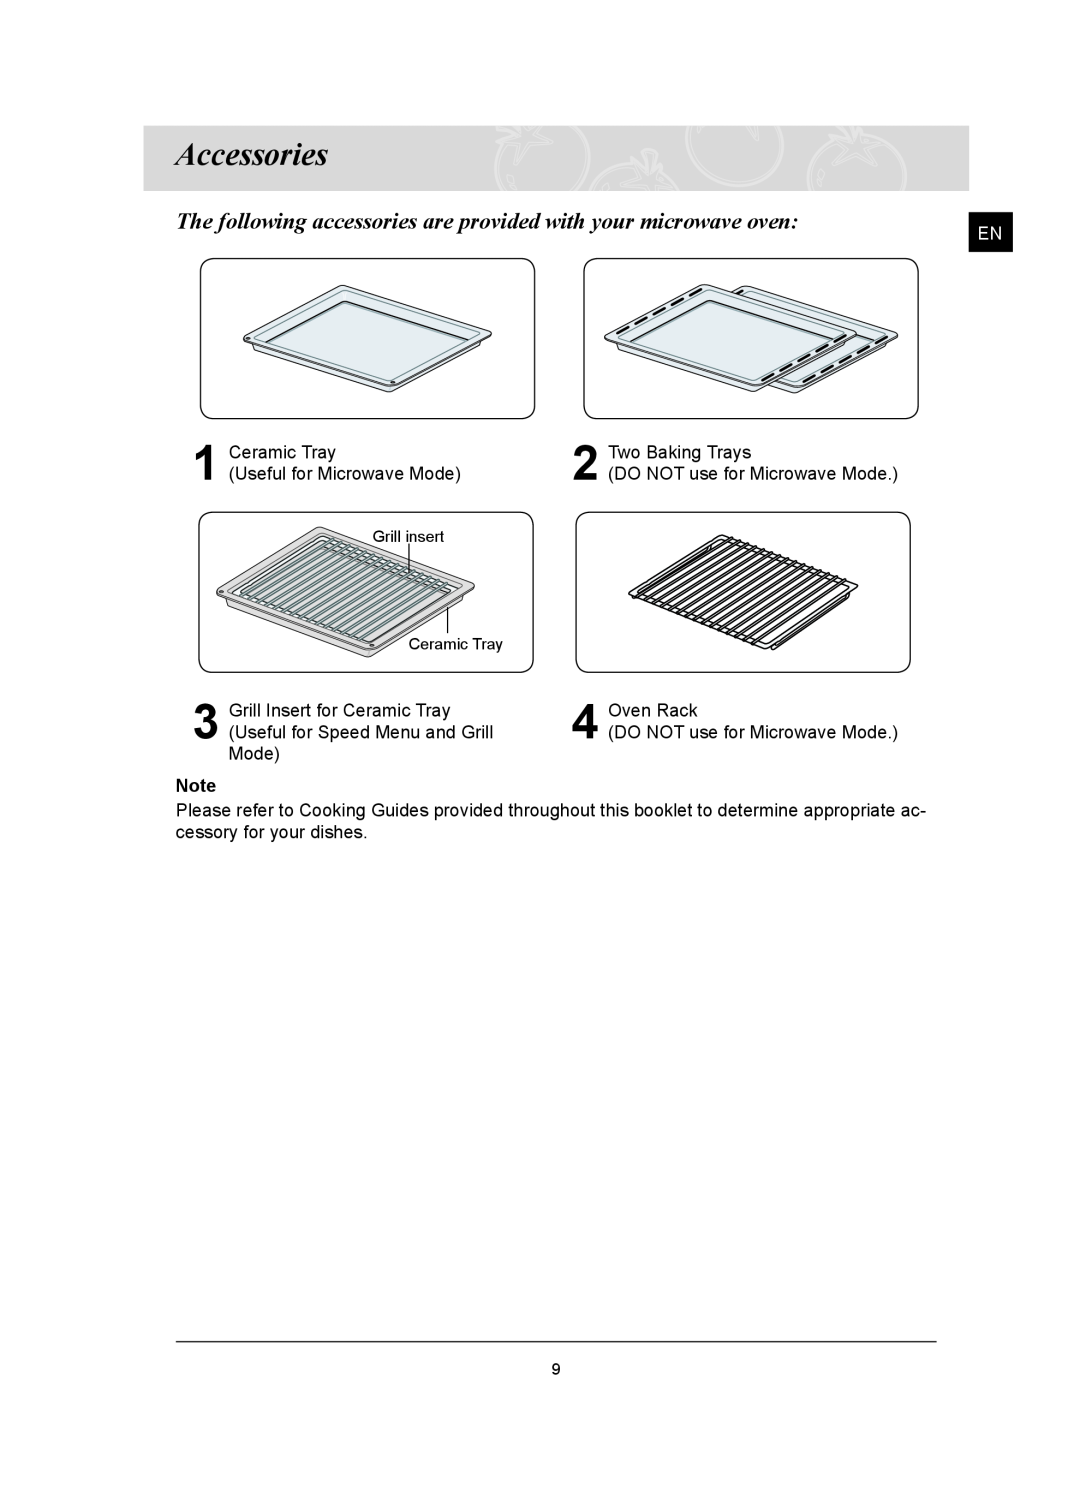 Samsung FQ159ST, FQ159UST owner manual Accessories, The following accessories are provided with your microwave oven 